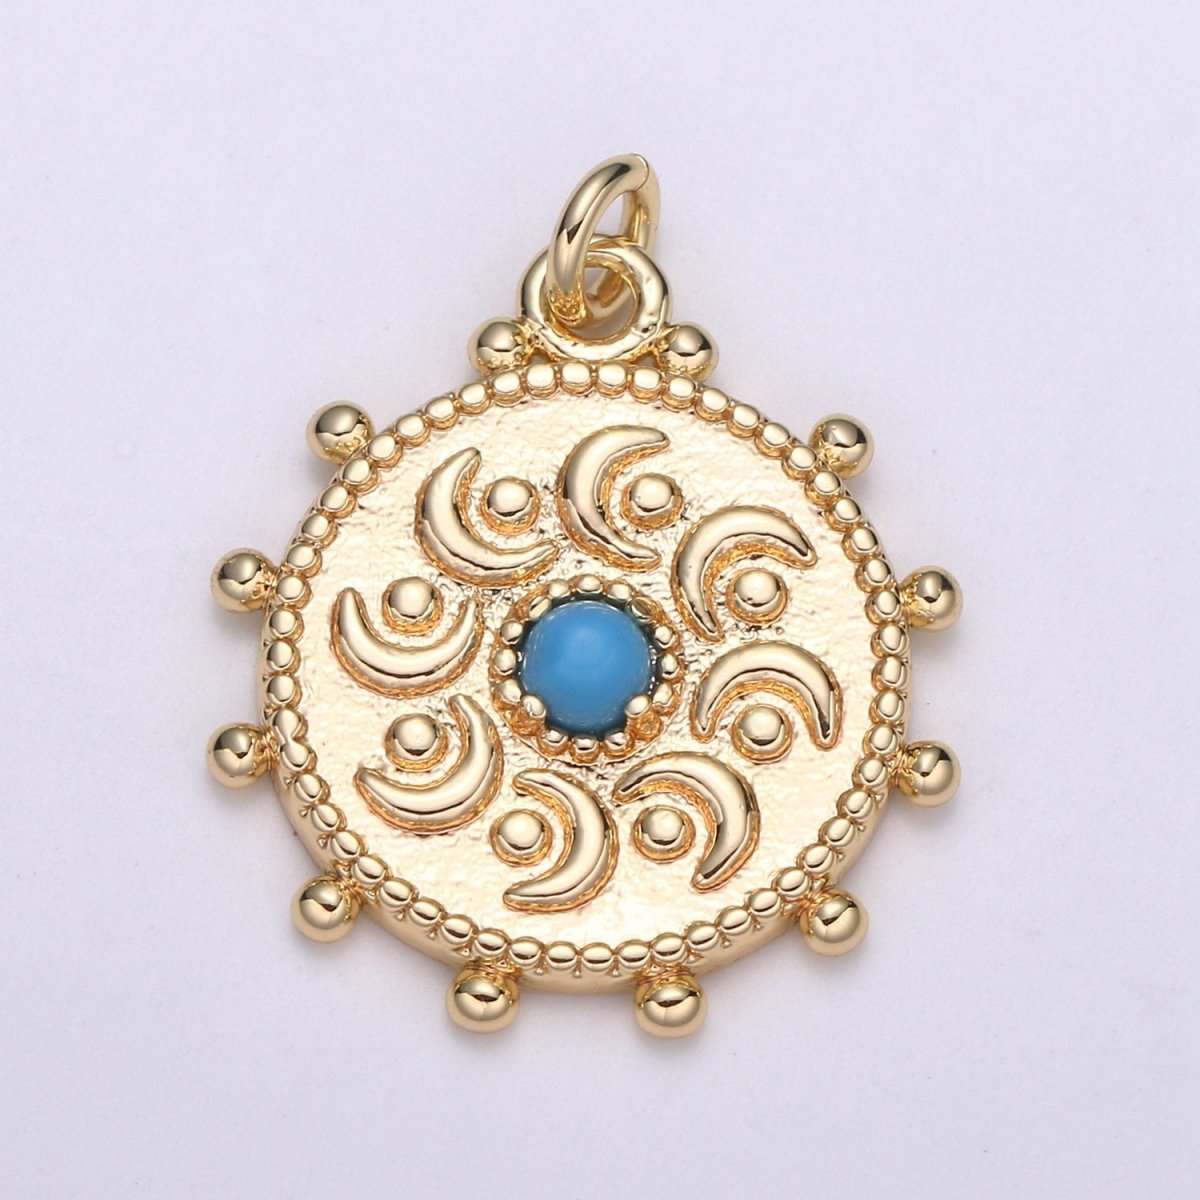 18K Gold Filled Medallion Charm 21.5x17.5mm Vintage Turqouise Pendant, Round Disc charms Minimalist Jewelry for Necklace Component E-144 - DLUXCA